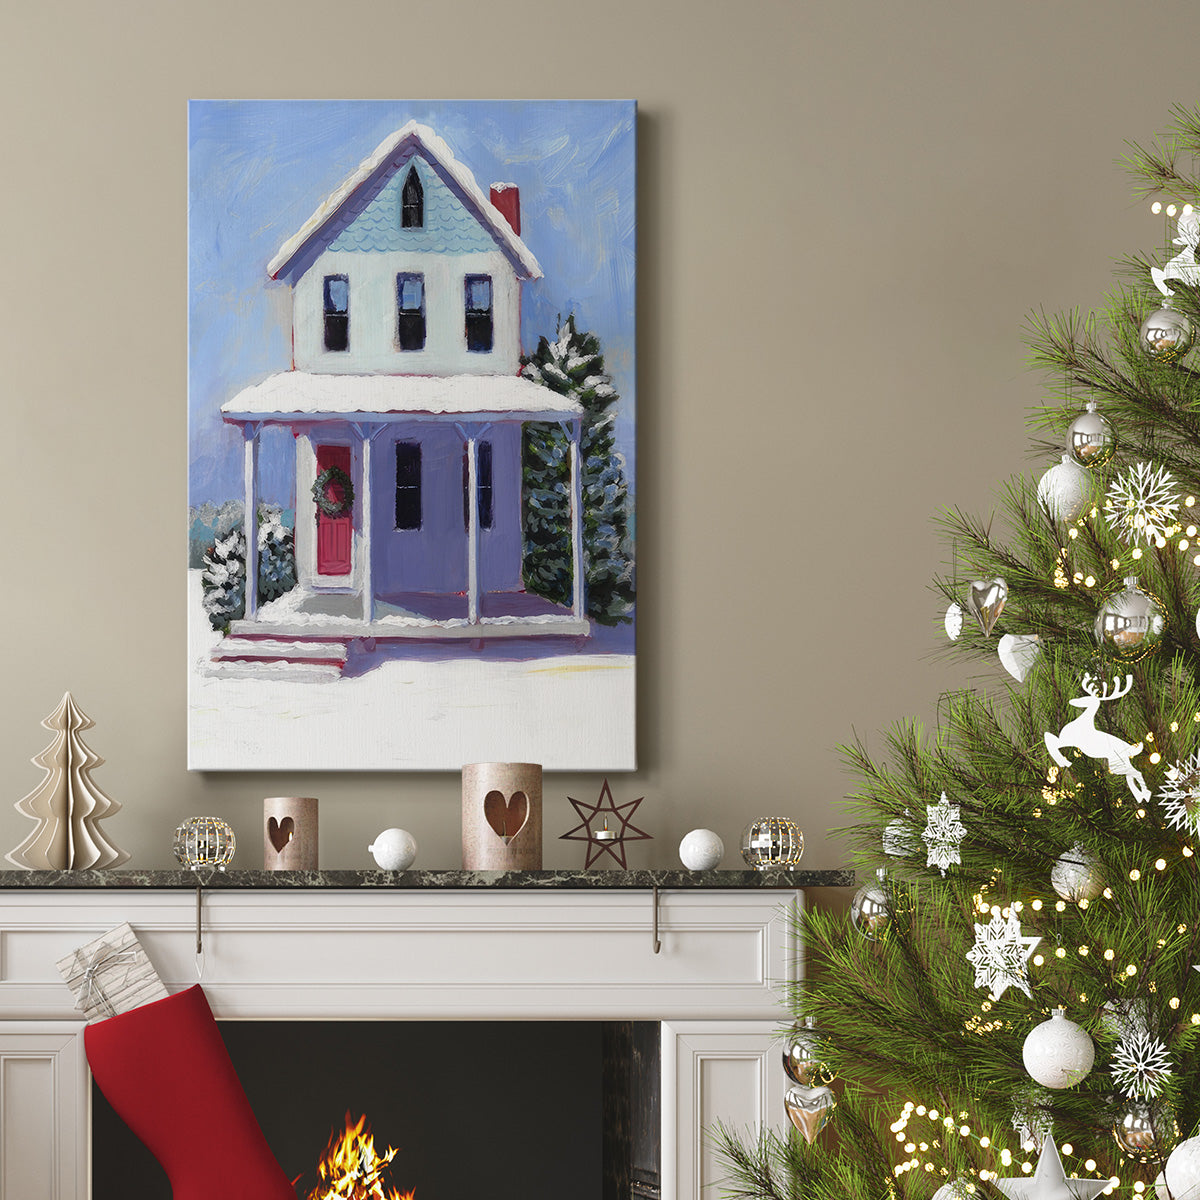 Victorian Home I - Gallery Wrapped Canvas